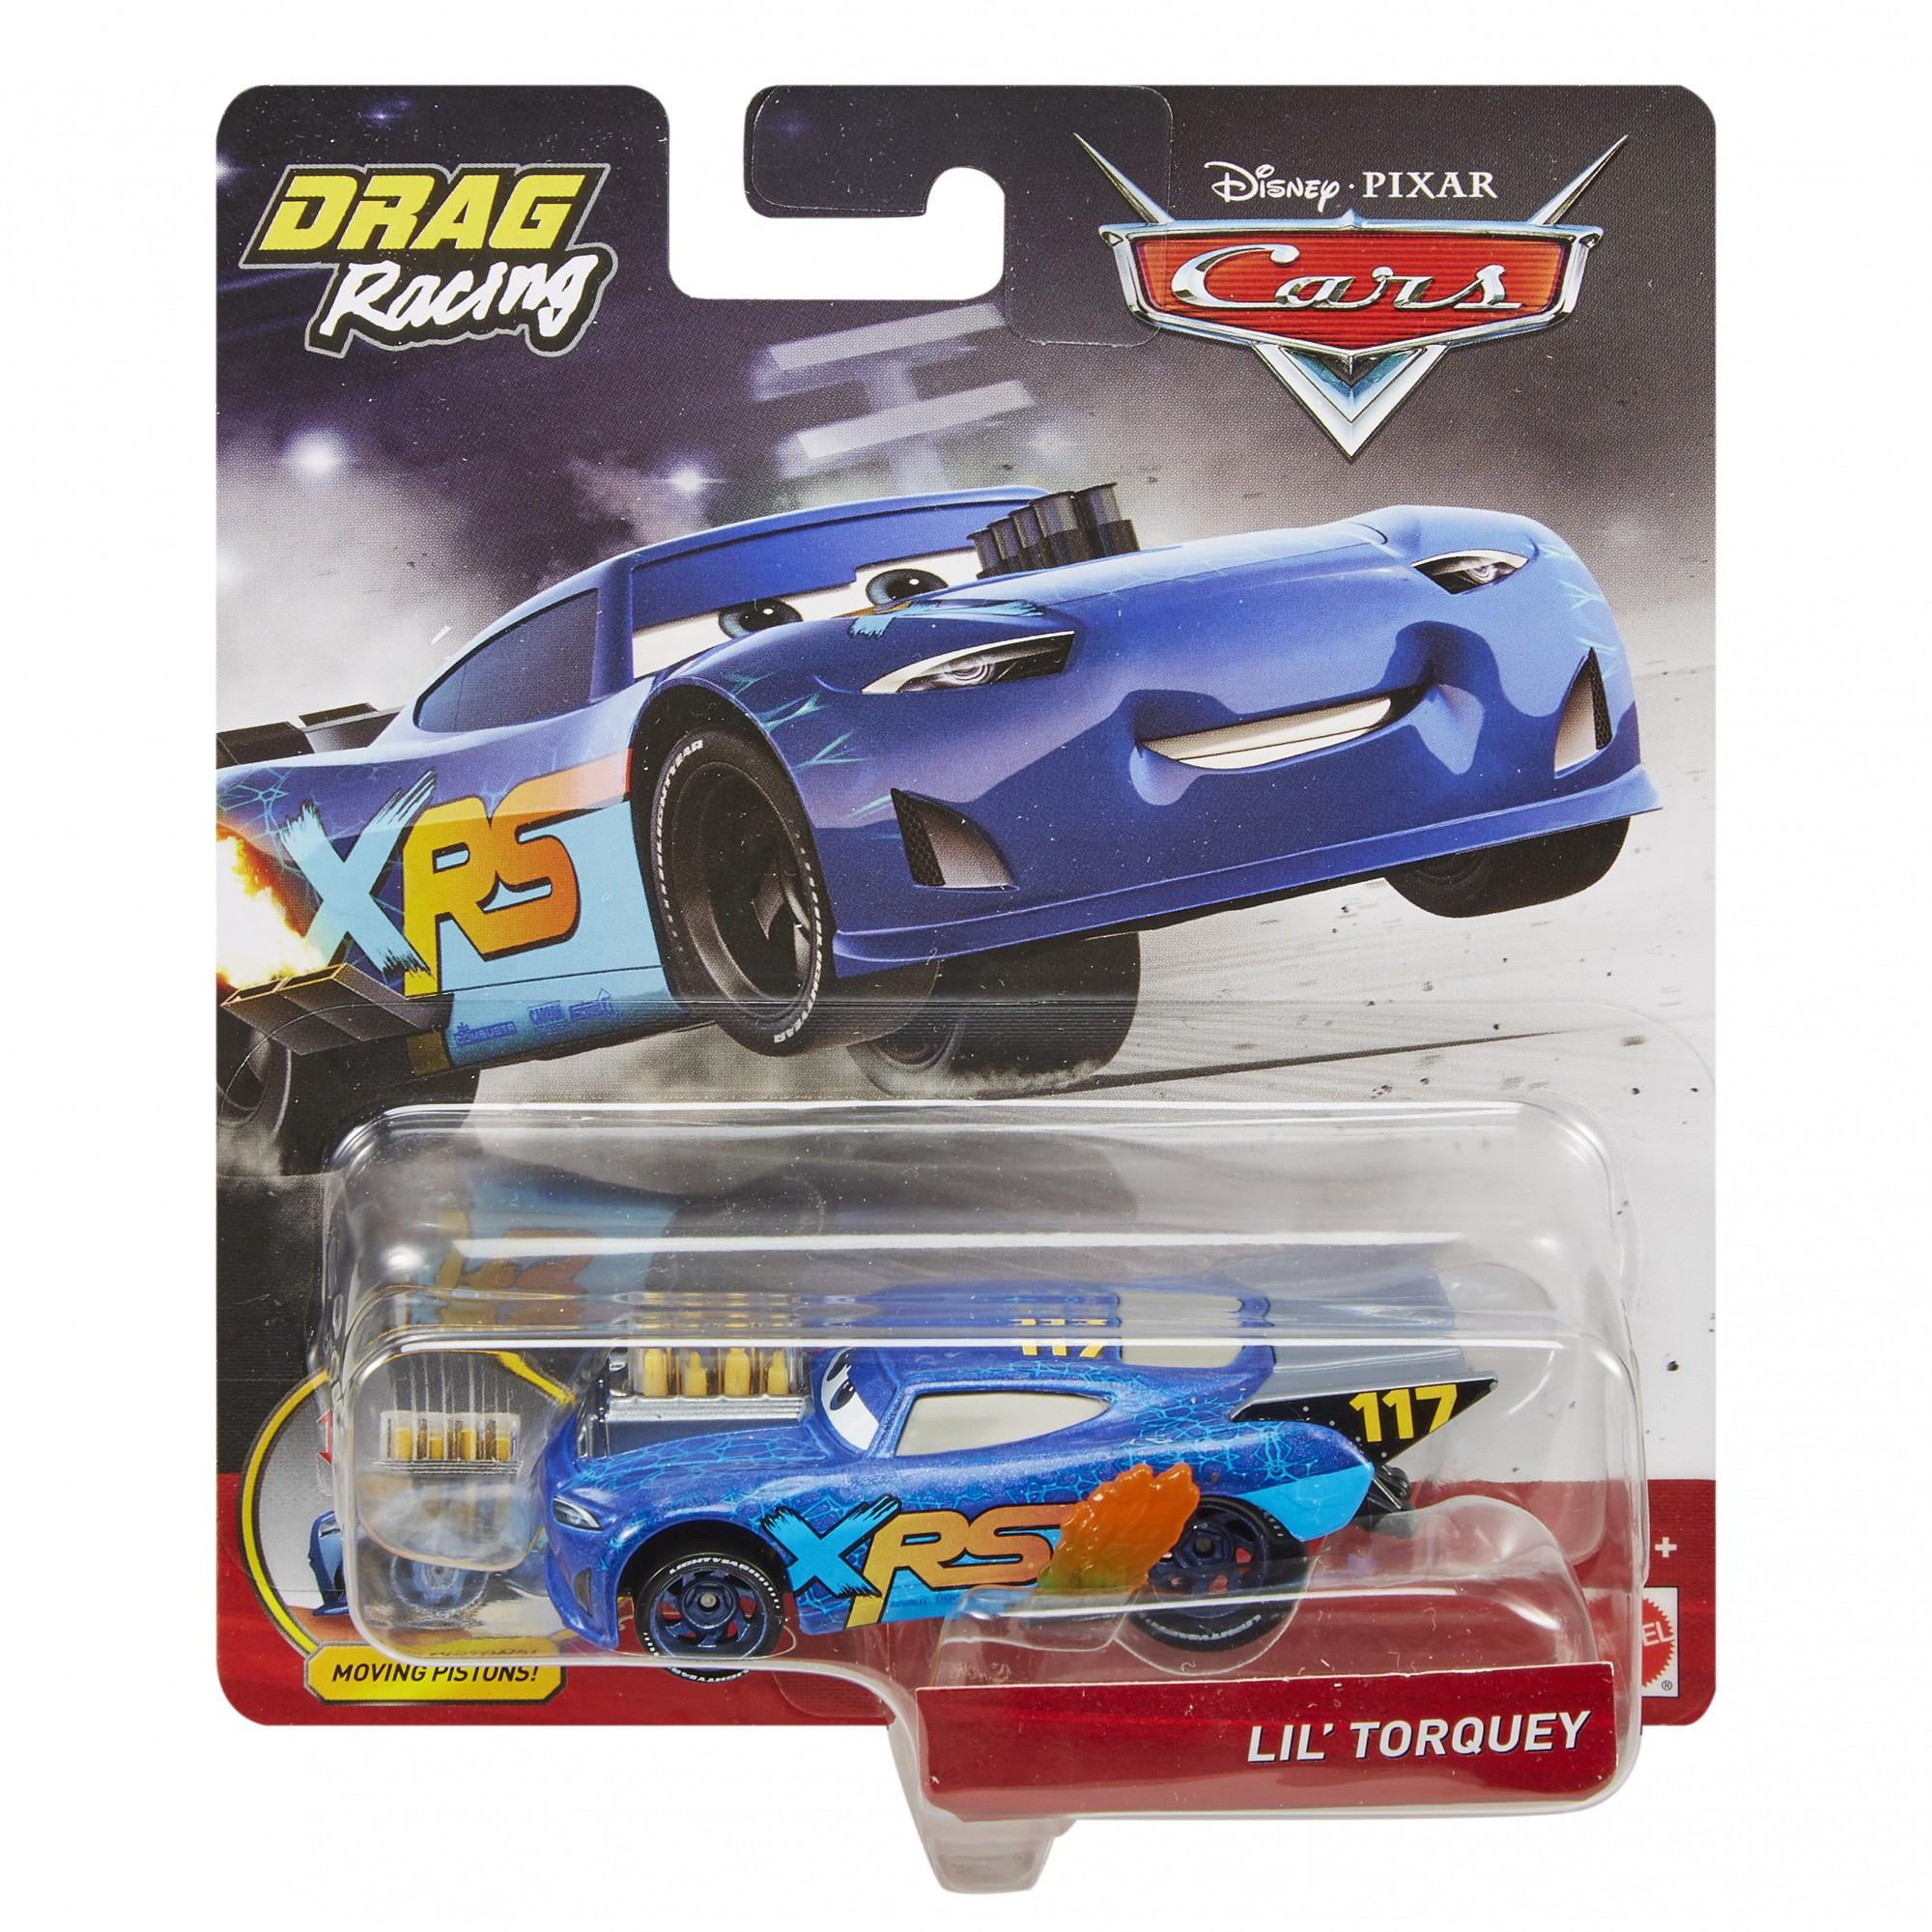 Details about   Disney Pixar CARS XRS Drag Racing Lil' Torquey with Moving Pistons NEW